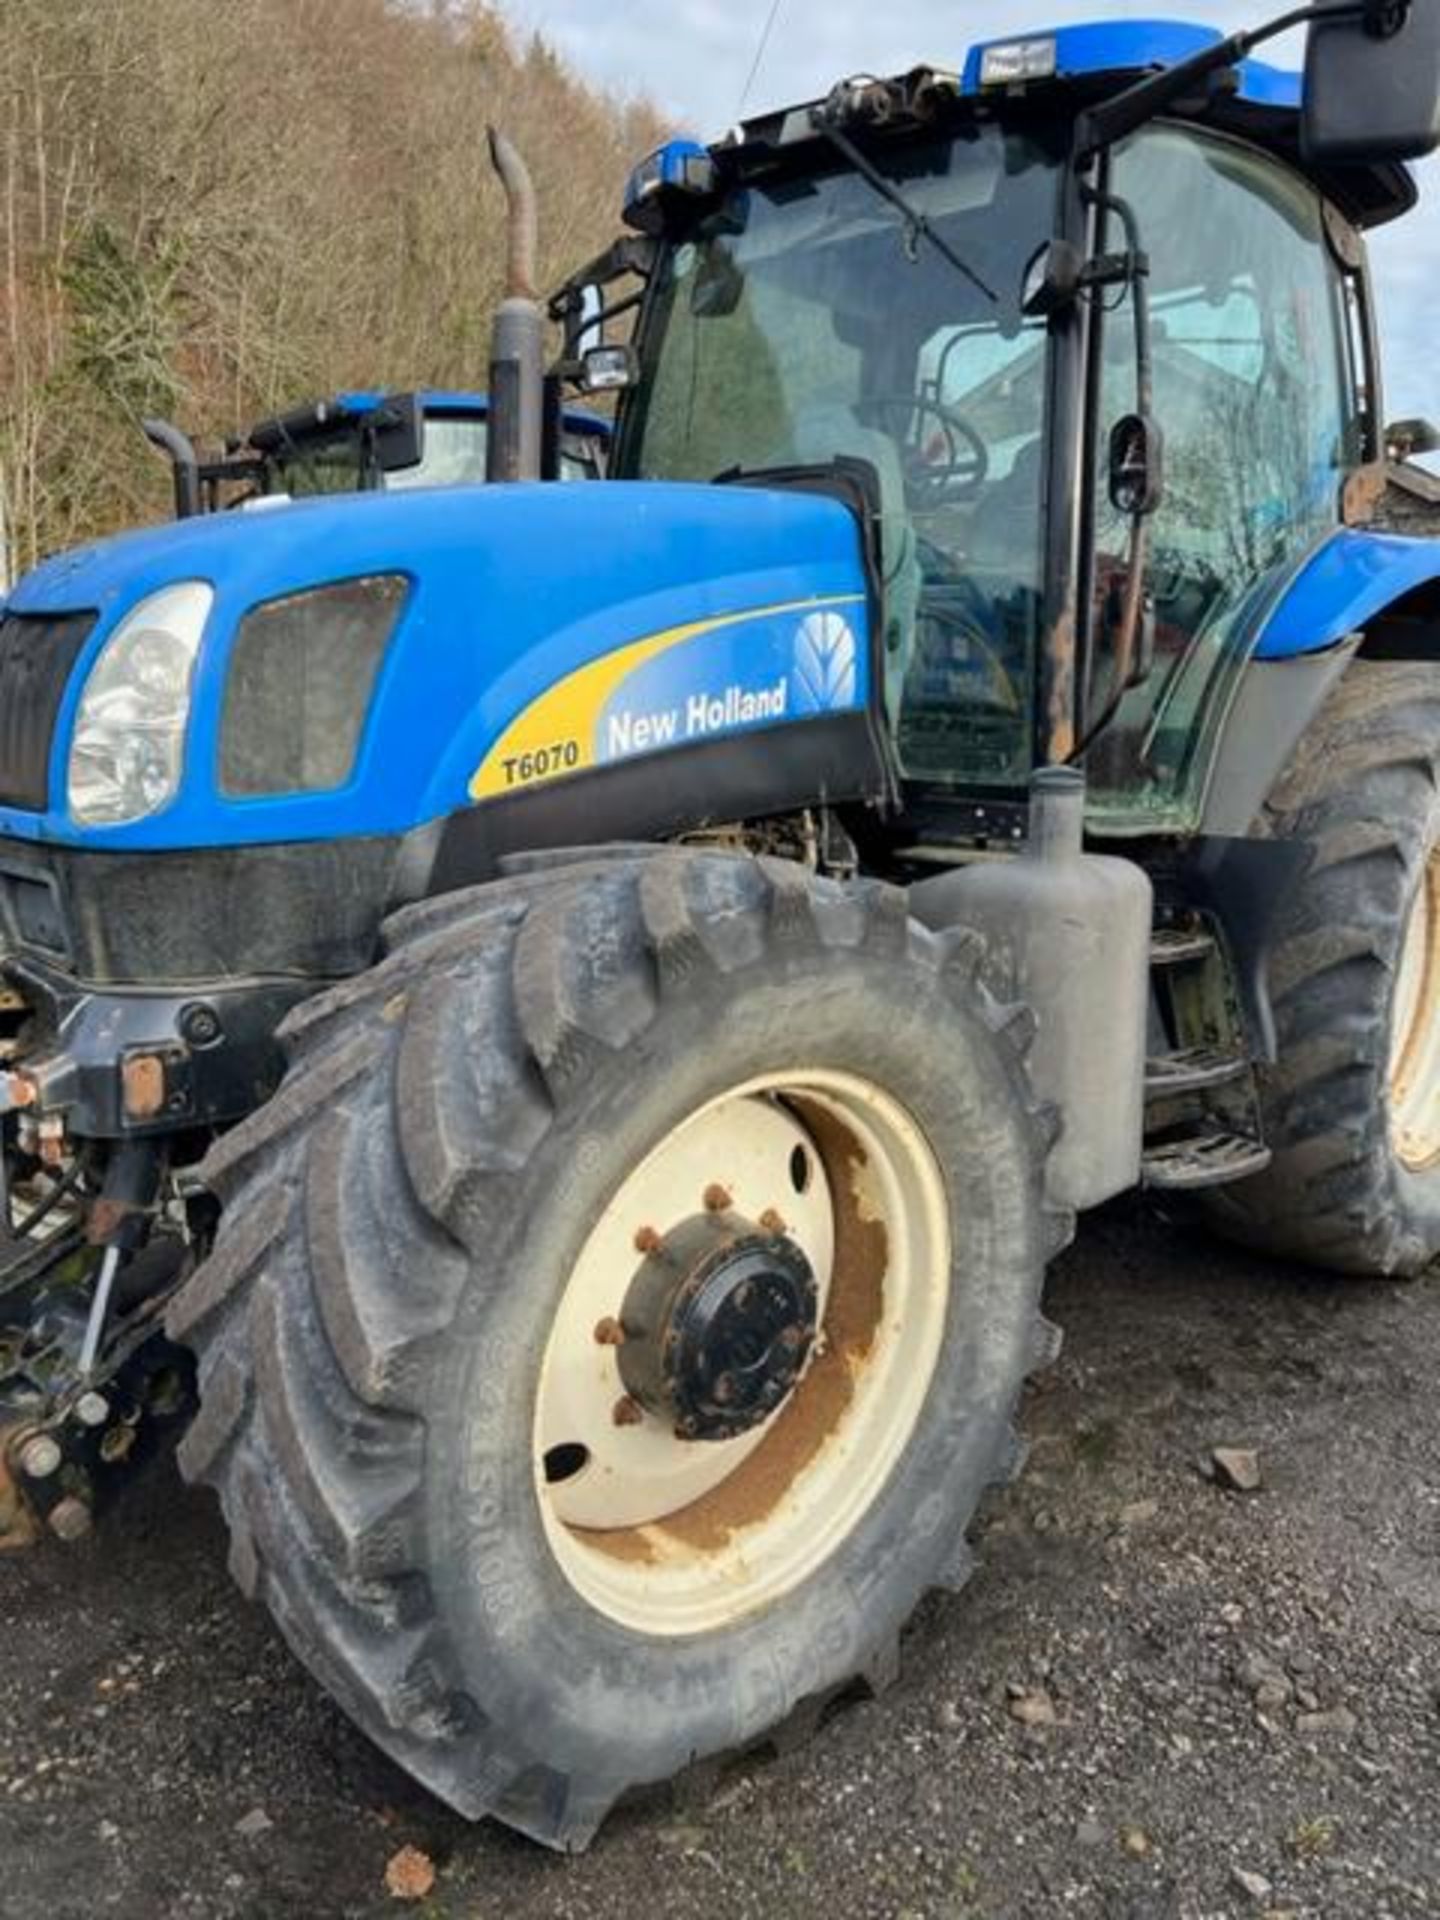 2010 NEW HOLLAND T6070 TRACTOR - 9700 HOURS - 50K GEARBOX - AIR BRAKES - Image 2 of 10